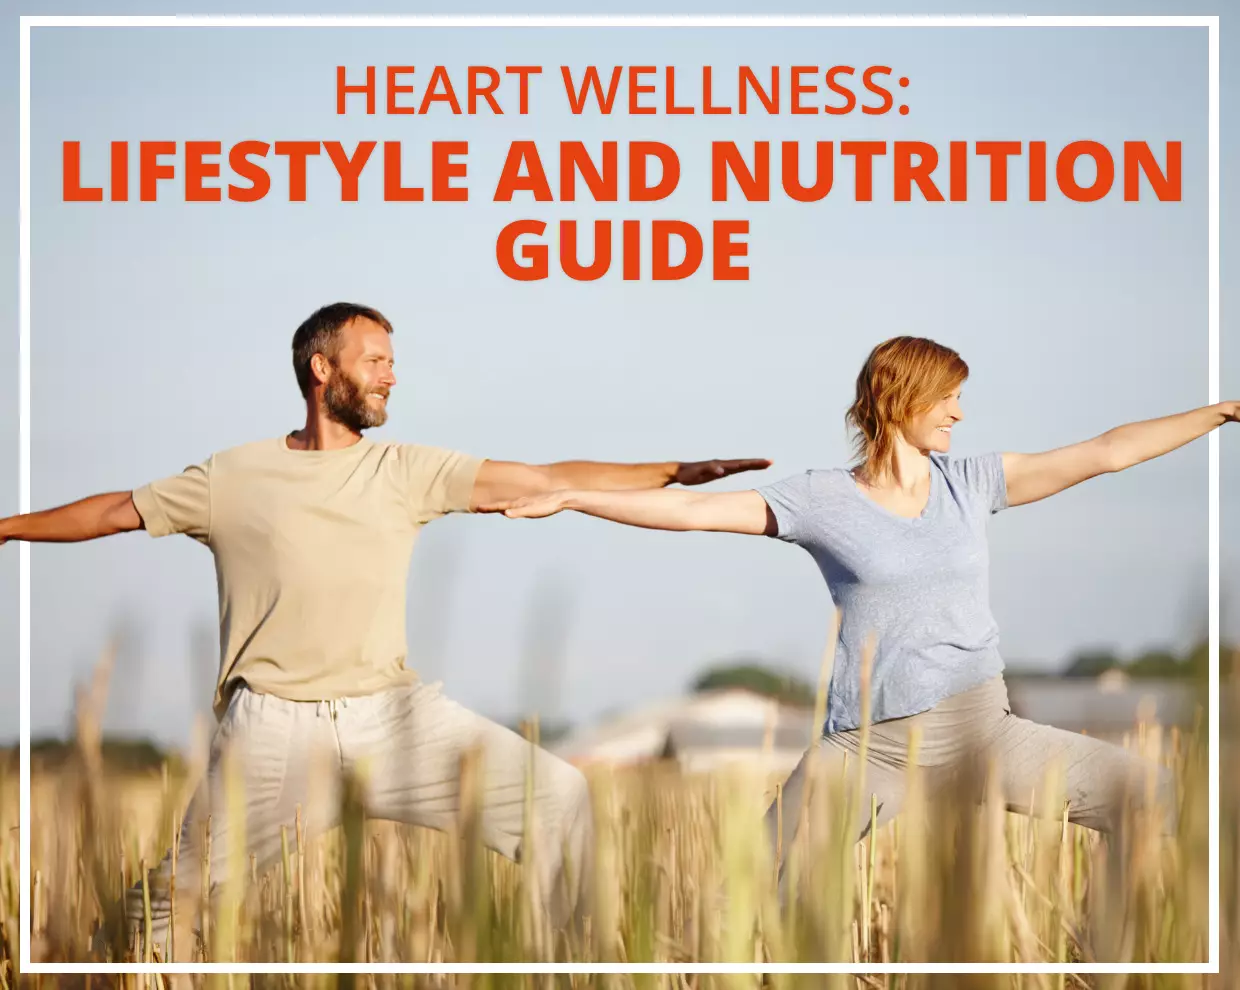 Heart Wellness: Lifestyle and Nutrition Guide 